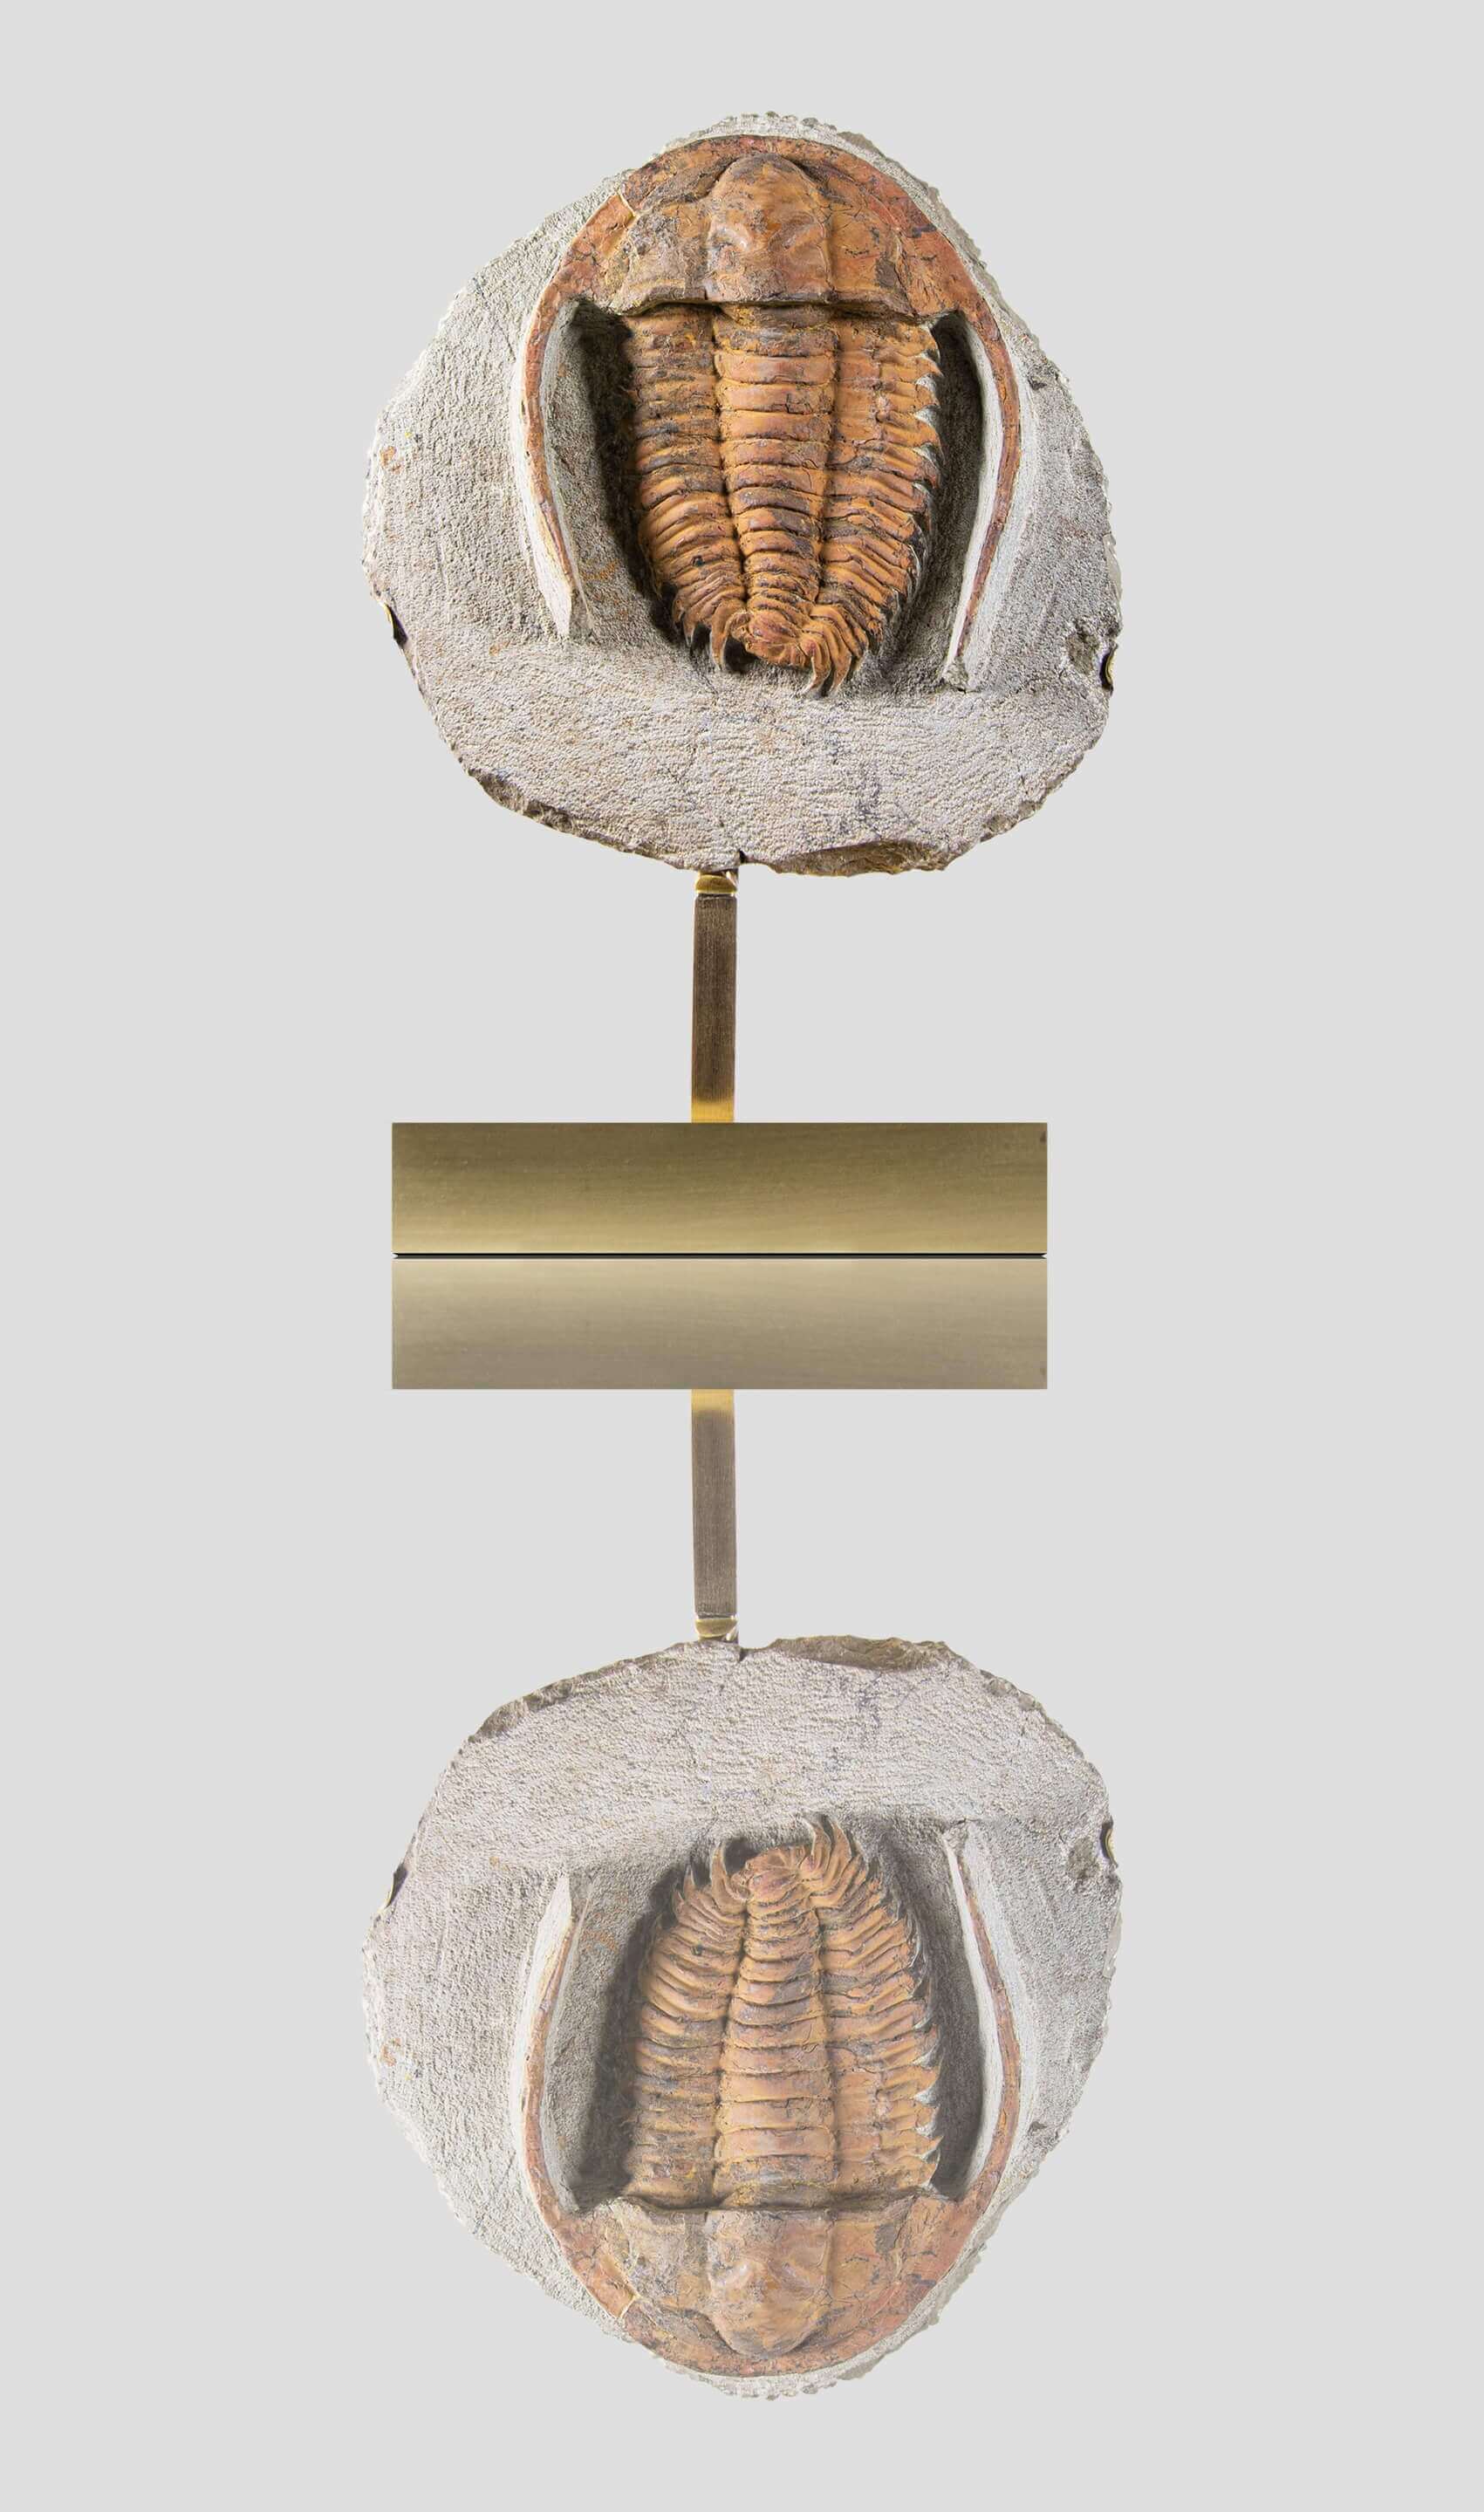 A fossil trilobite mounted on our brass stand series